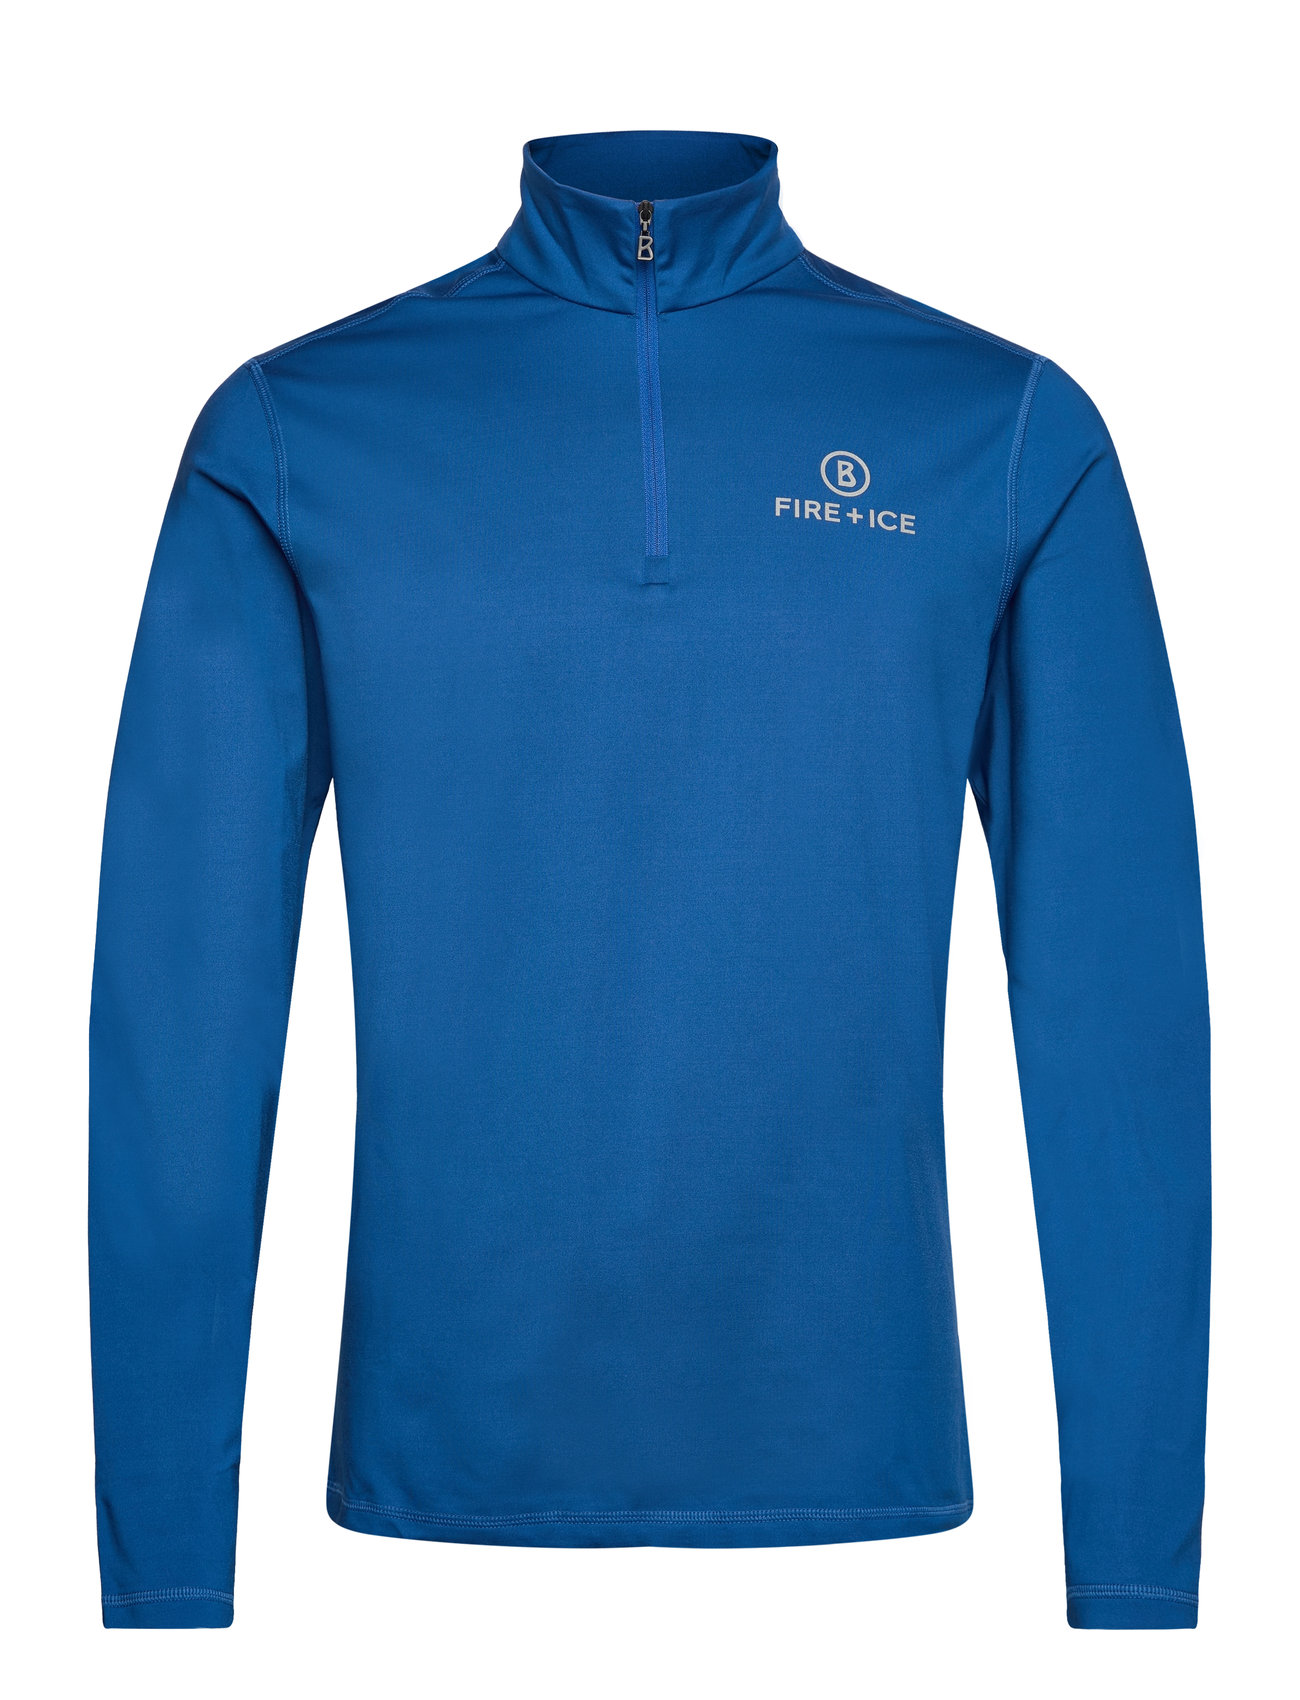 Pascal Sport Base Layer Tops Blue FIRE+ICE